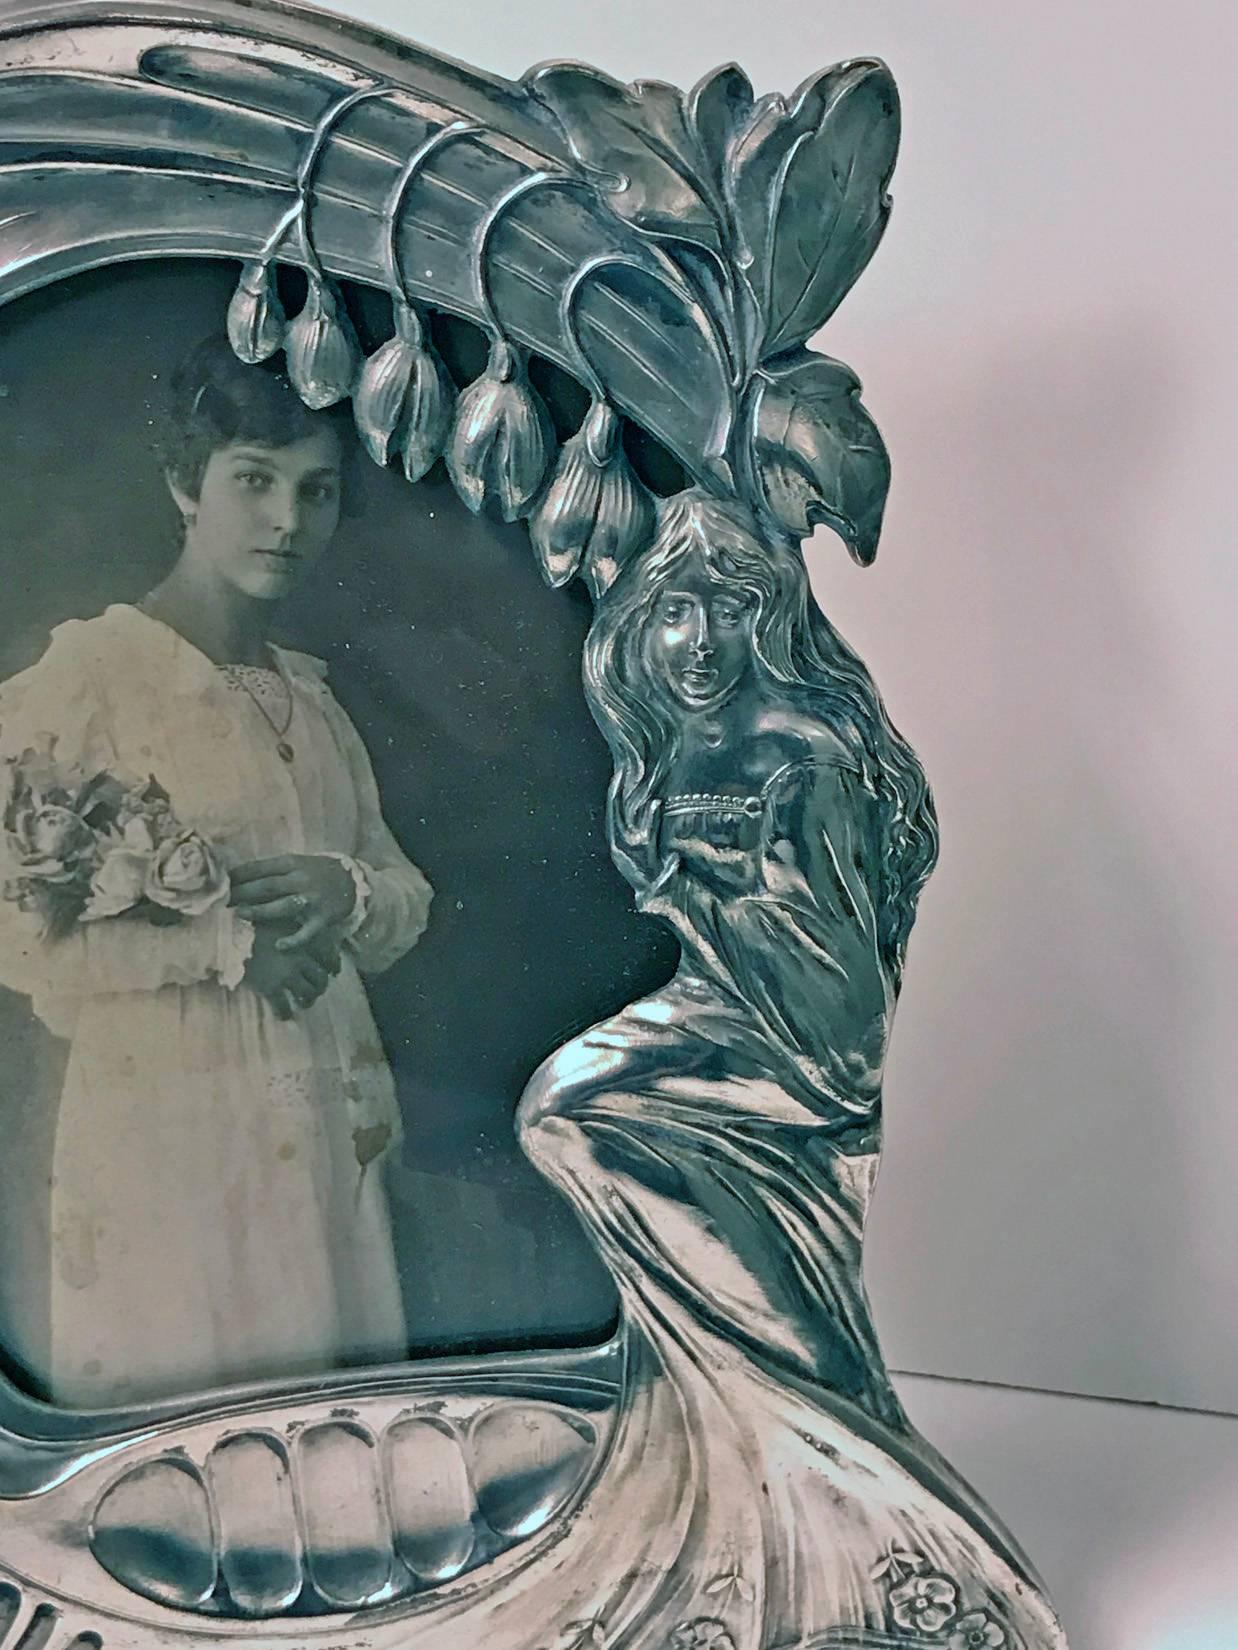 Rare design Art Nouveau pewter photograph frame, Austria, Argentor, circa 1900, stamped M.H. with eagle, Max Hacger. The frame depicting lady amidst floral decoration with flowing hair and dress. Stamped on reverse. With eagle mark MH. Overall: